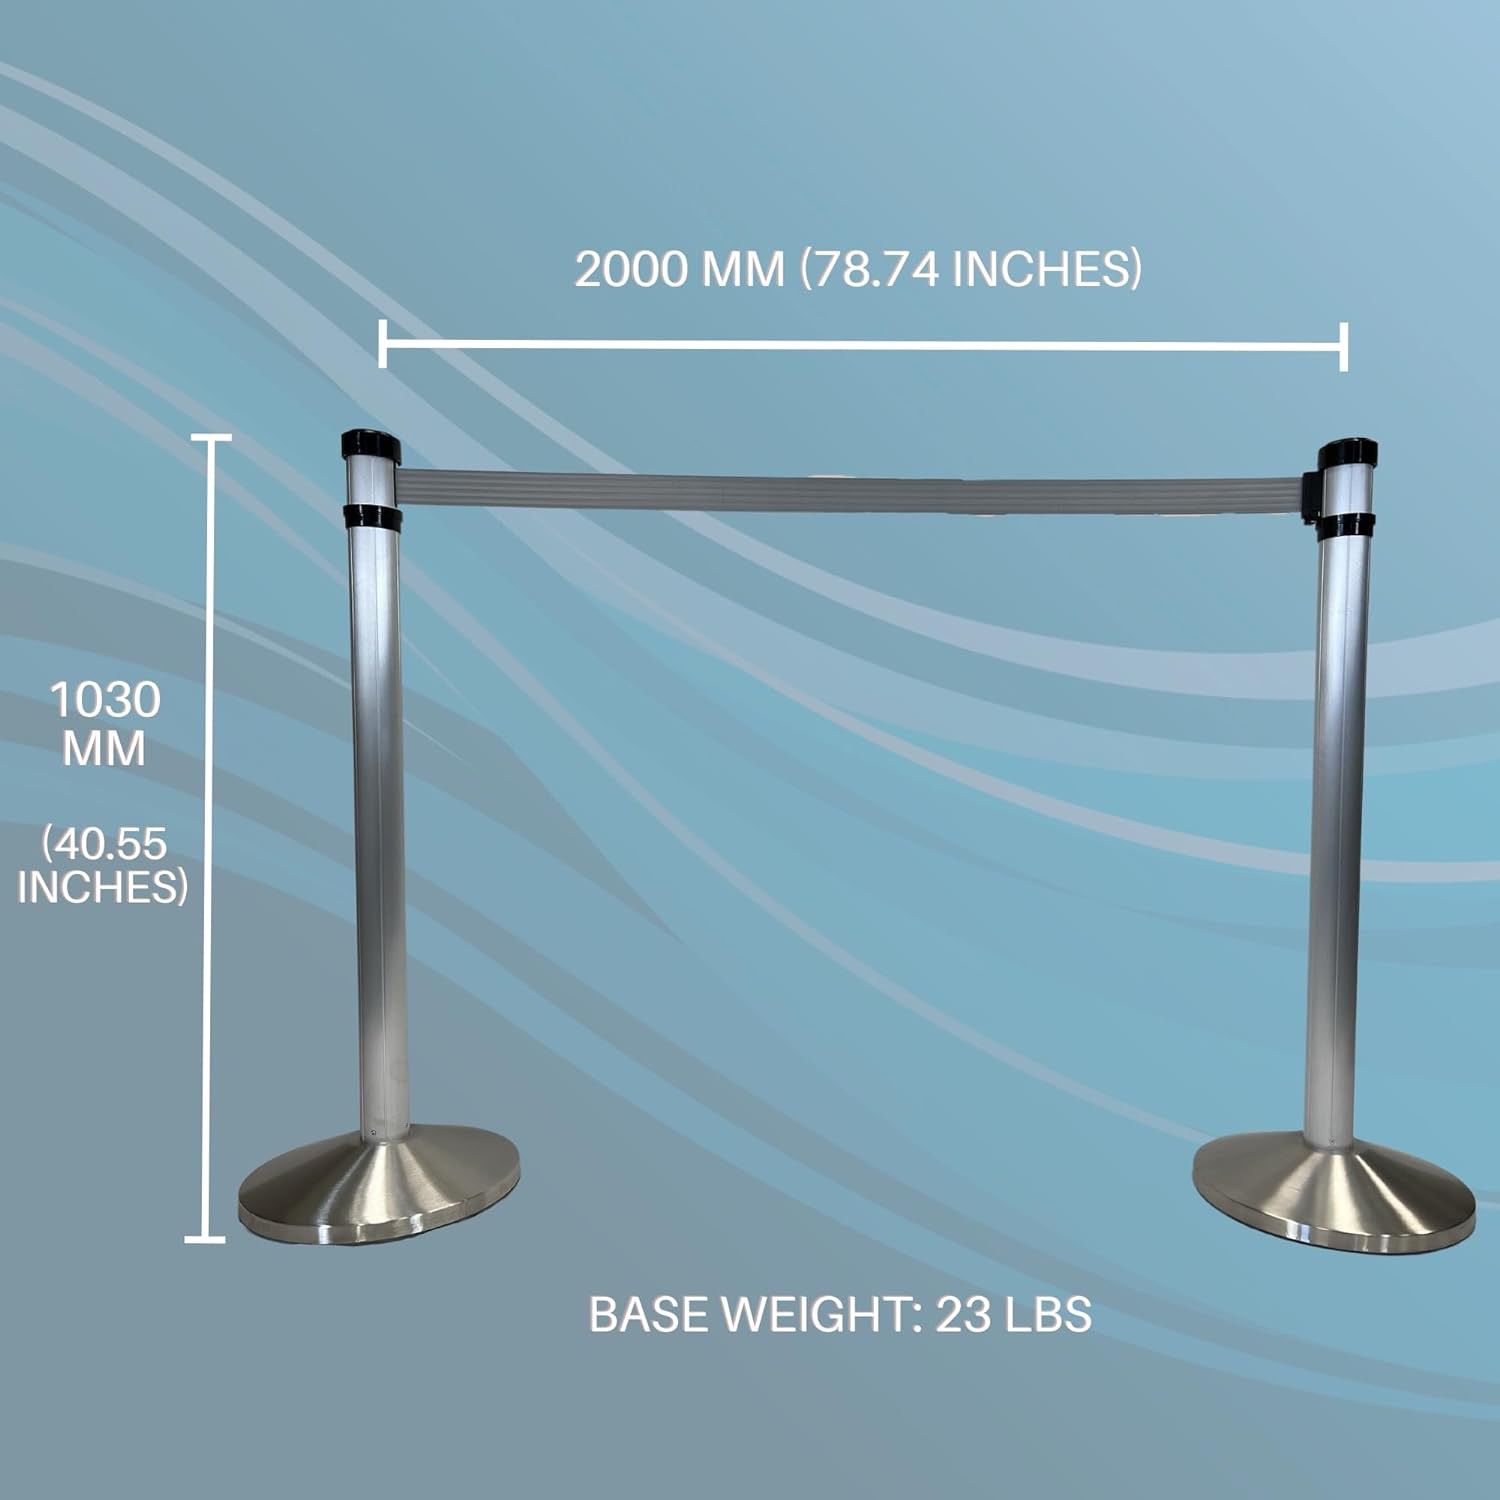 Crowd Control 40.5" Tall Stanchions with 6.5 Foot Retractable Belt- Durable, Portable Barrier System for Efficient Public Space Organization - Enhance